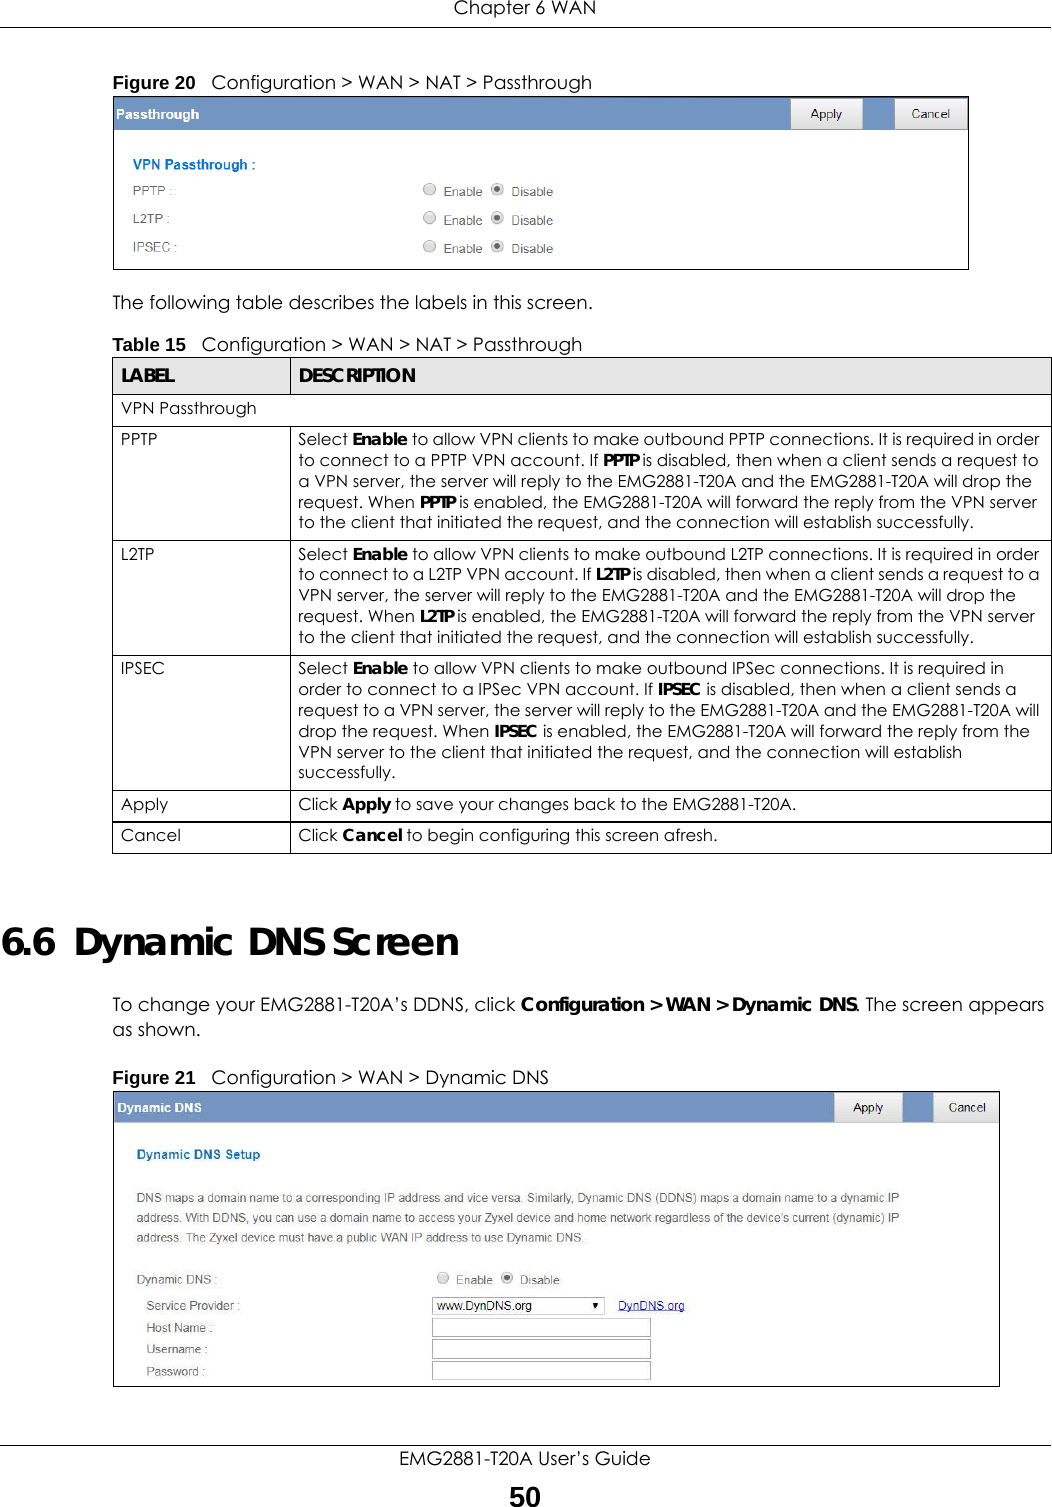 Chapter 6 WANEMG2881-T20A User’s Guide50Figure 20   Configuration &gt; WAN &gt; NAT &gt; PassthroughThe following table describes the labels in this screen.6.6  Dynamic DNS ScreenTo change your EMG2881-T20A’s DDNS, click Configuration &gt; WAN &gt; Dynamic DNS. The screen appears as shown.Figure 21   Configuration &gt; WAN &gt; Dynamic DNS Table 15   Configuration &gt; WAN &gt; NAT &gt; PassthroughLABEL DESCRIPTIONVPN Passthrough PPTP Select Enable to allow VPN clients to make outbound PPTP connections. It is required in order to connect to a PPTP VPN account. If PPTP is disabled, then when a client sends a request to a VPN server, the server will reply to the EMG2881-T20A and the EMG2881-T20A will drop the request. When PPTP is enabled, the EMG2881-T20A will forward the reply from the VPN server to the client that initiated the request, and the connection will establish successfully.L2TP Select Enable to allow VPN clients to make outbound L2TP connections. It is required in order to connect to a L2TP VPN account. If L2TP is disabled, then when a client sends a request to a VPN server, the server will reply to the EMG2881-T20A and the EMG2881-T20A will drop the request. When L2TP is enabled, the EMG2881-T20A will forward the reply from the VPN server to the client that initiated the request, and the connection will establish successfully.IPSEC Select Enable to allow VPN clients to make outbound IPSec connections. It is required in order to connect to a IPSec VPN account. If IPSEC is disabled, then when a client sends a request to a VPN server, the server will reply to the EMG2881-T20A and the EMG2881-T20A will drop the request. When IPSEC is enabled, the EMG2881-T20A will forward the reply from the VPN server to the client that initiated the request, and the connection will establish successfully.Apply Click Apply to save your changes back to the EMG2881-T20A.Cancel Click Cancel to begin configuring this screen afresh.